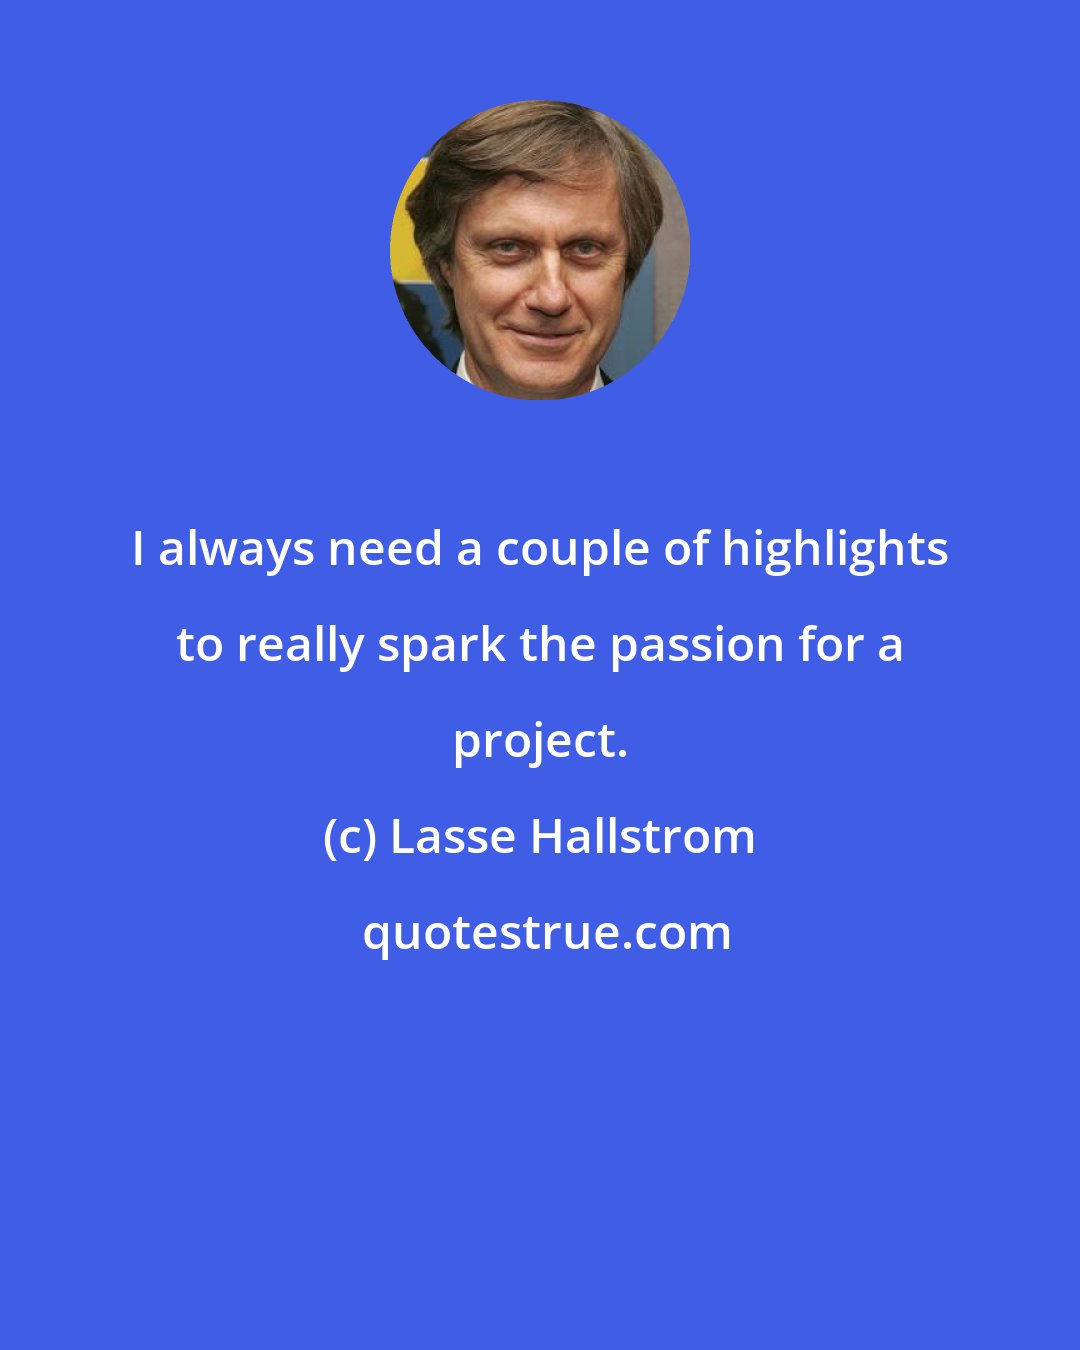 Lasse Hallstrom: I always need a couple of highlights to really spark the passion for a project.